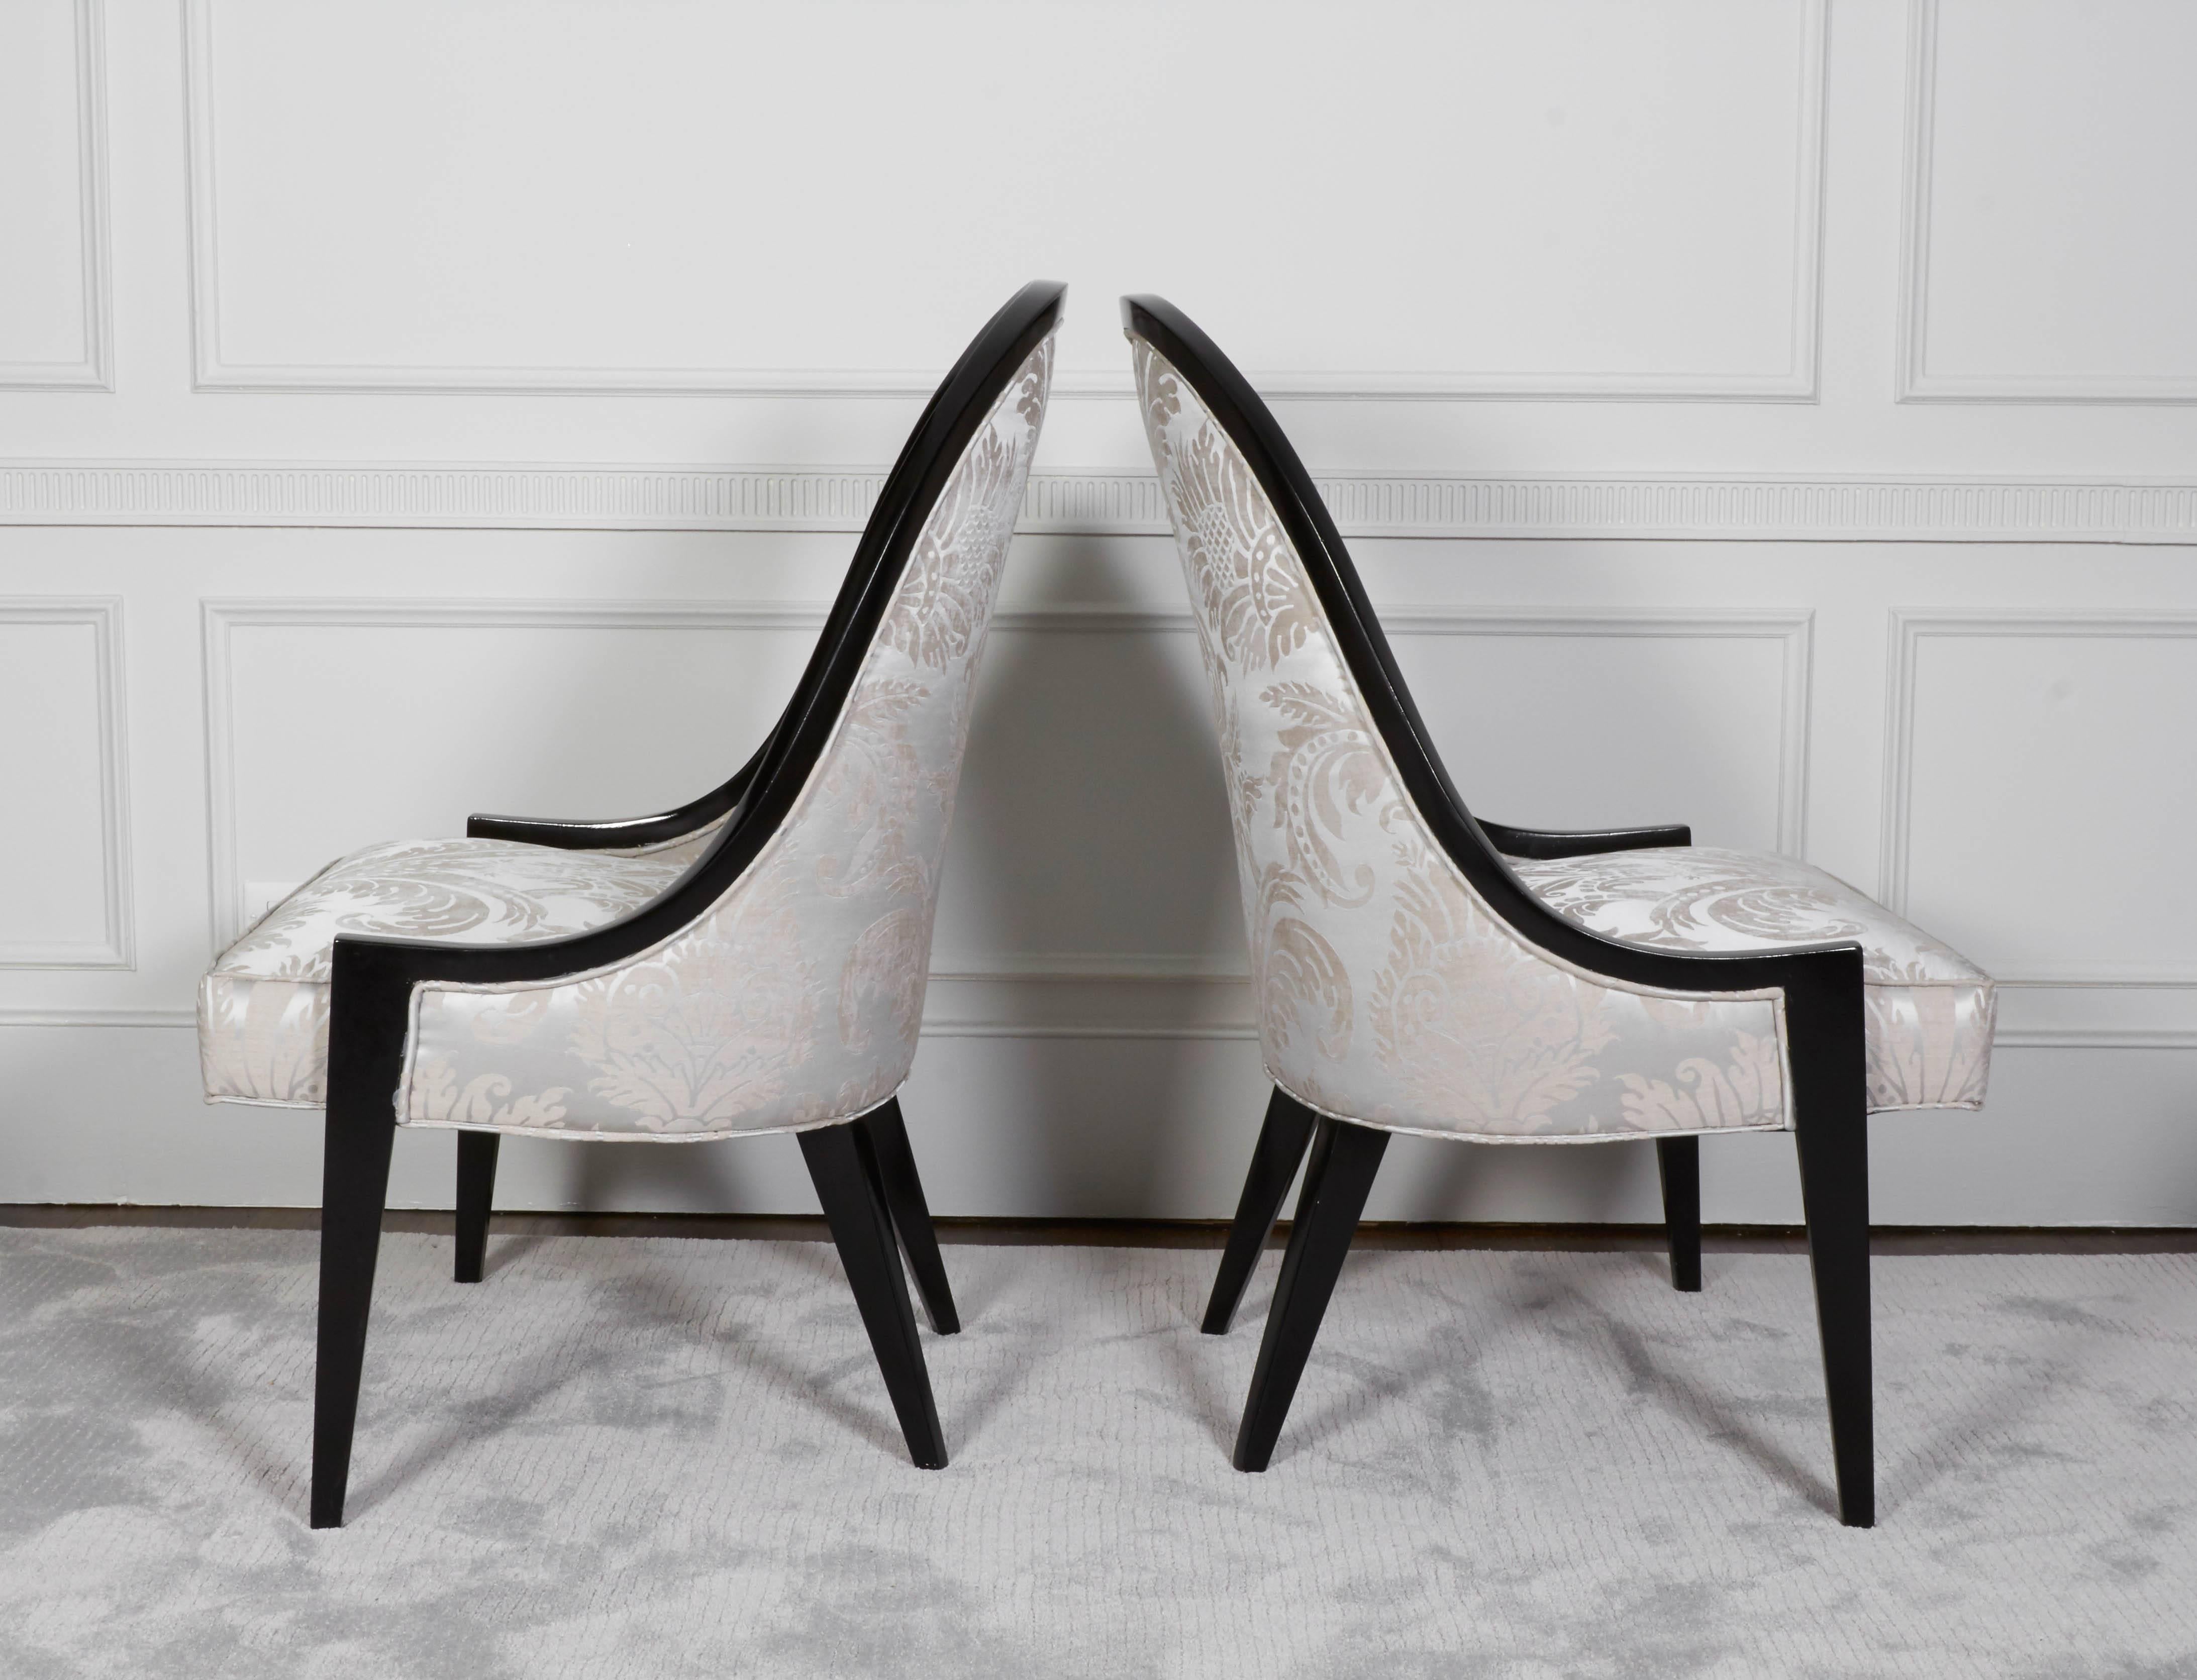 A pair of Classic gondola chairs by Harvey Probber with a newly black lacquered frame and Dedar silk Damask print.